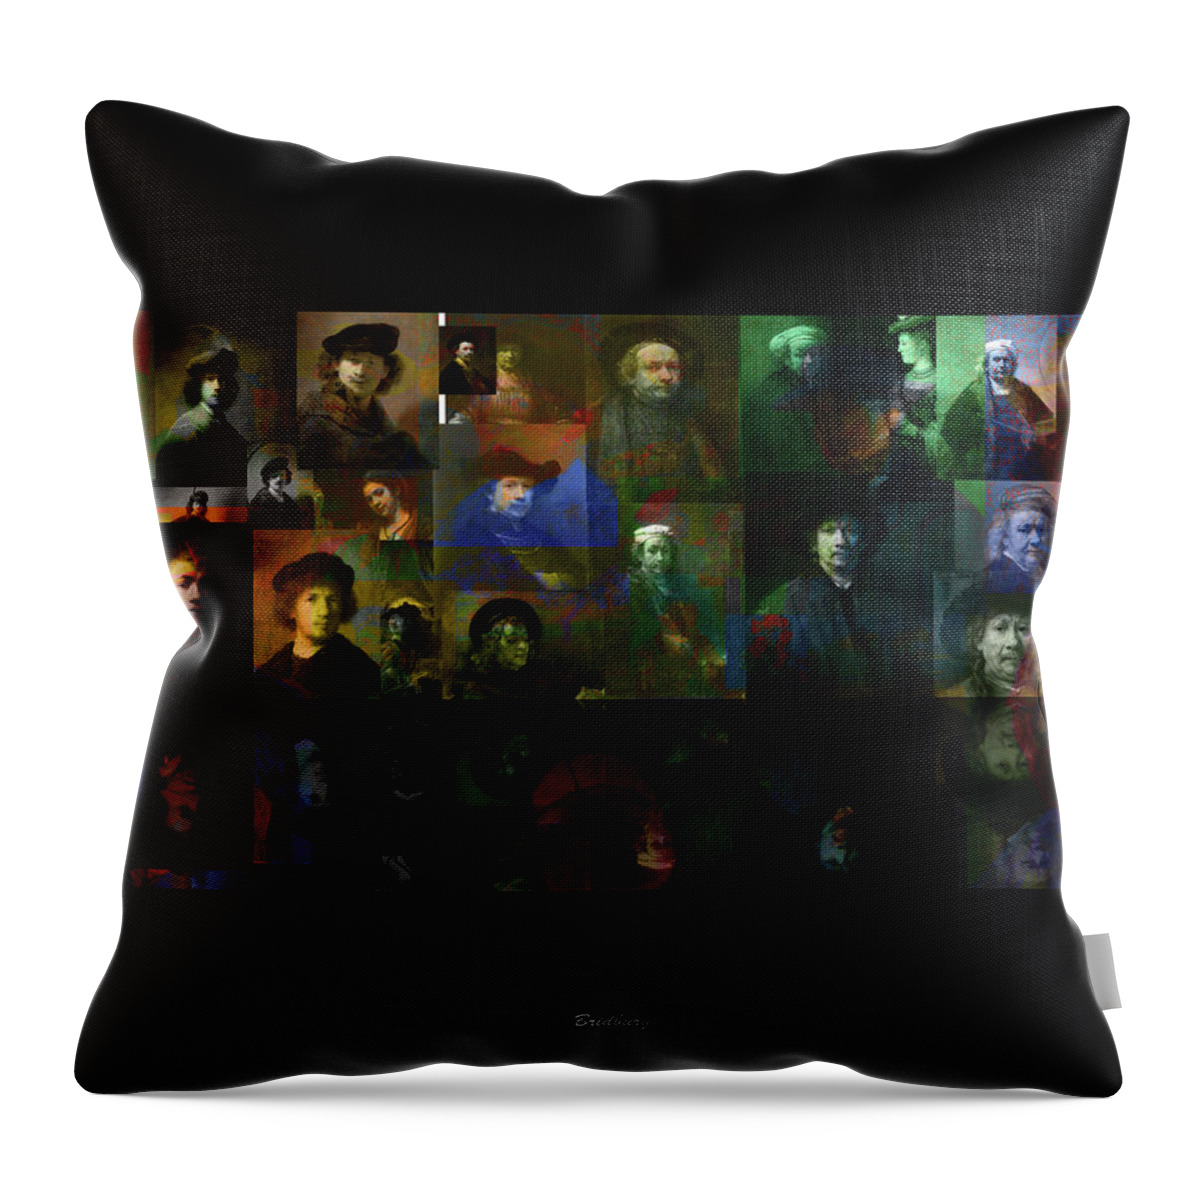 Abstract In The Living Room Throw Pillow featuring the digital art Rembrandt and Colors by van Gogh by David Bridburg